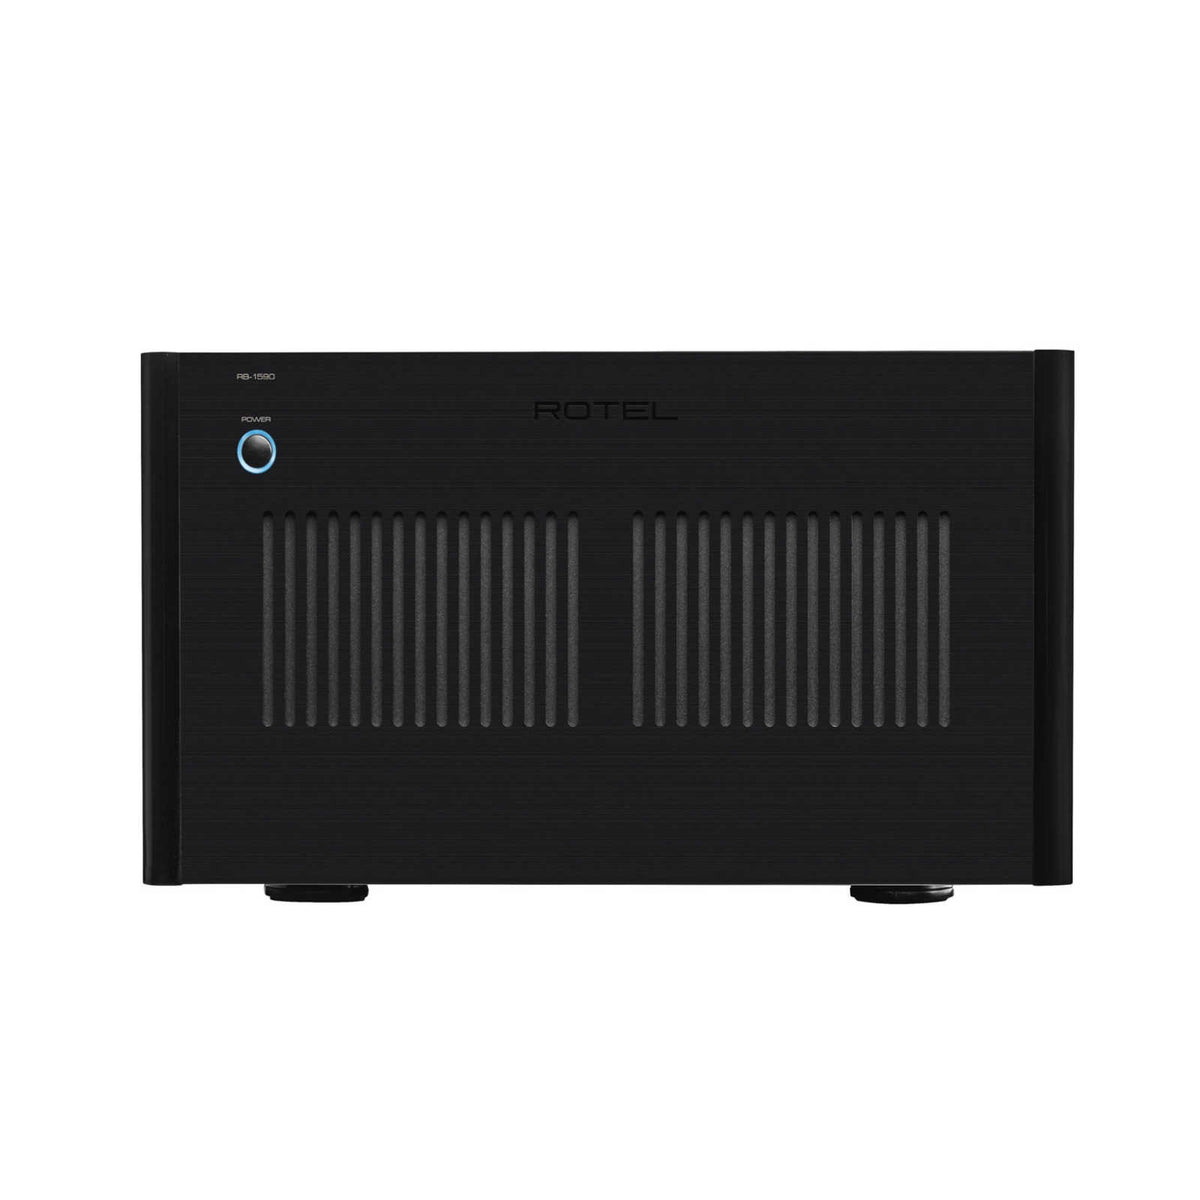 Rotel RB-1590 Stereo Power Amplifier (Black) -  Ooberpad India